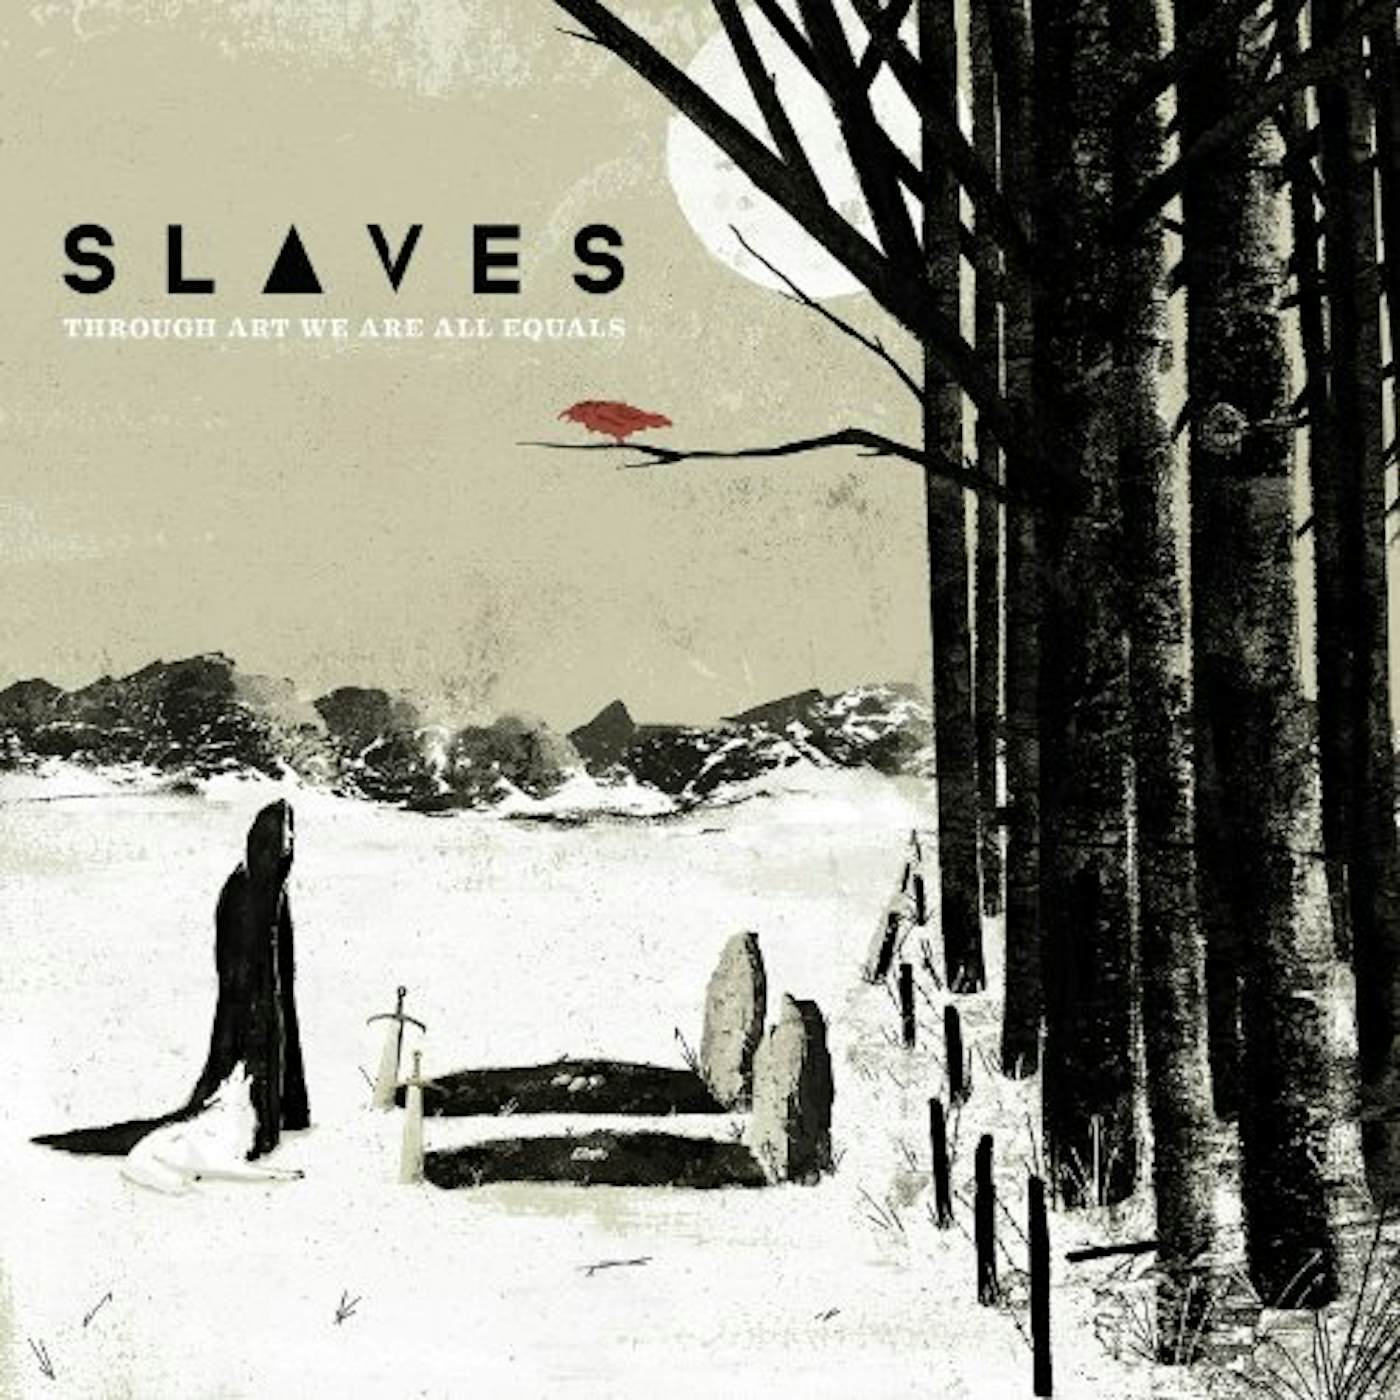 Slaves Through Art We Are All Equals Vinyl Record